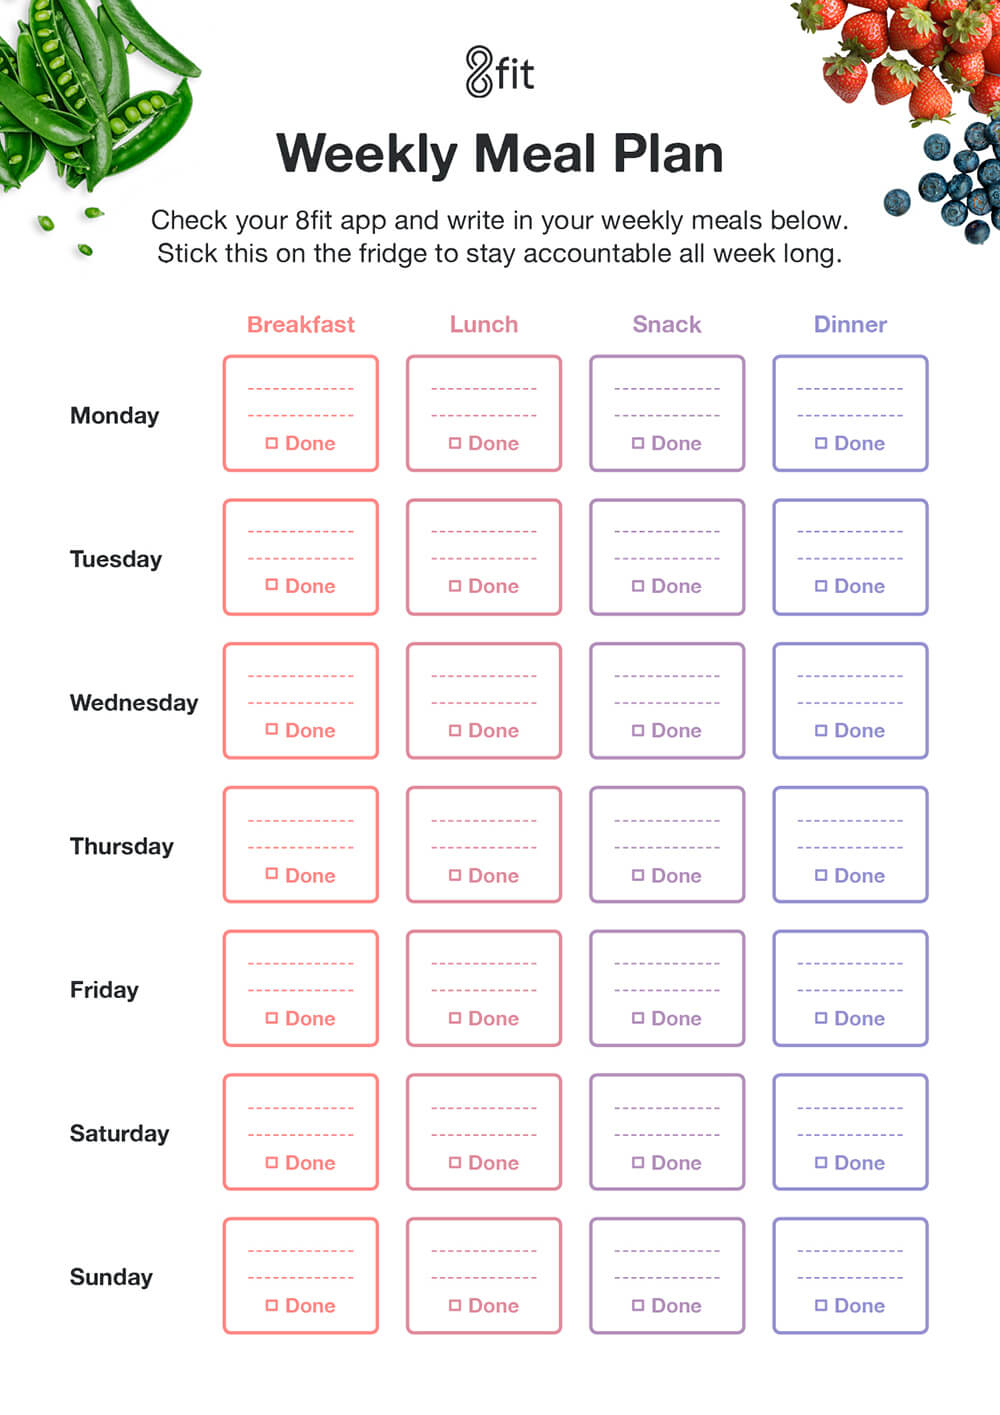 Printable Weekly Meal Planner Template And Grocery List | 8Fit - Free Printable Meal Plans For Weight Loss